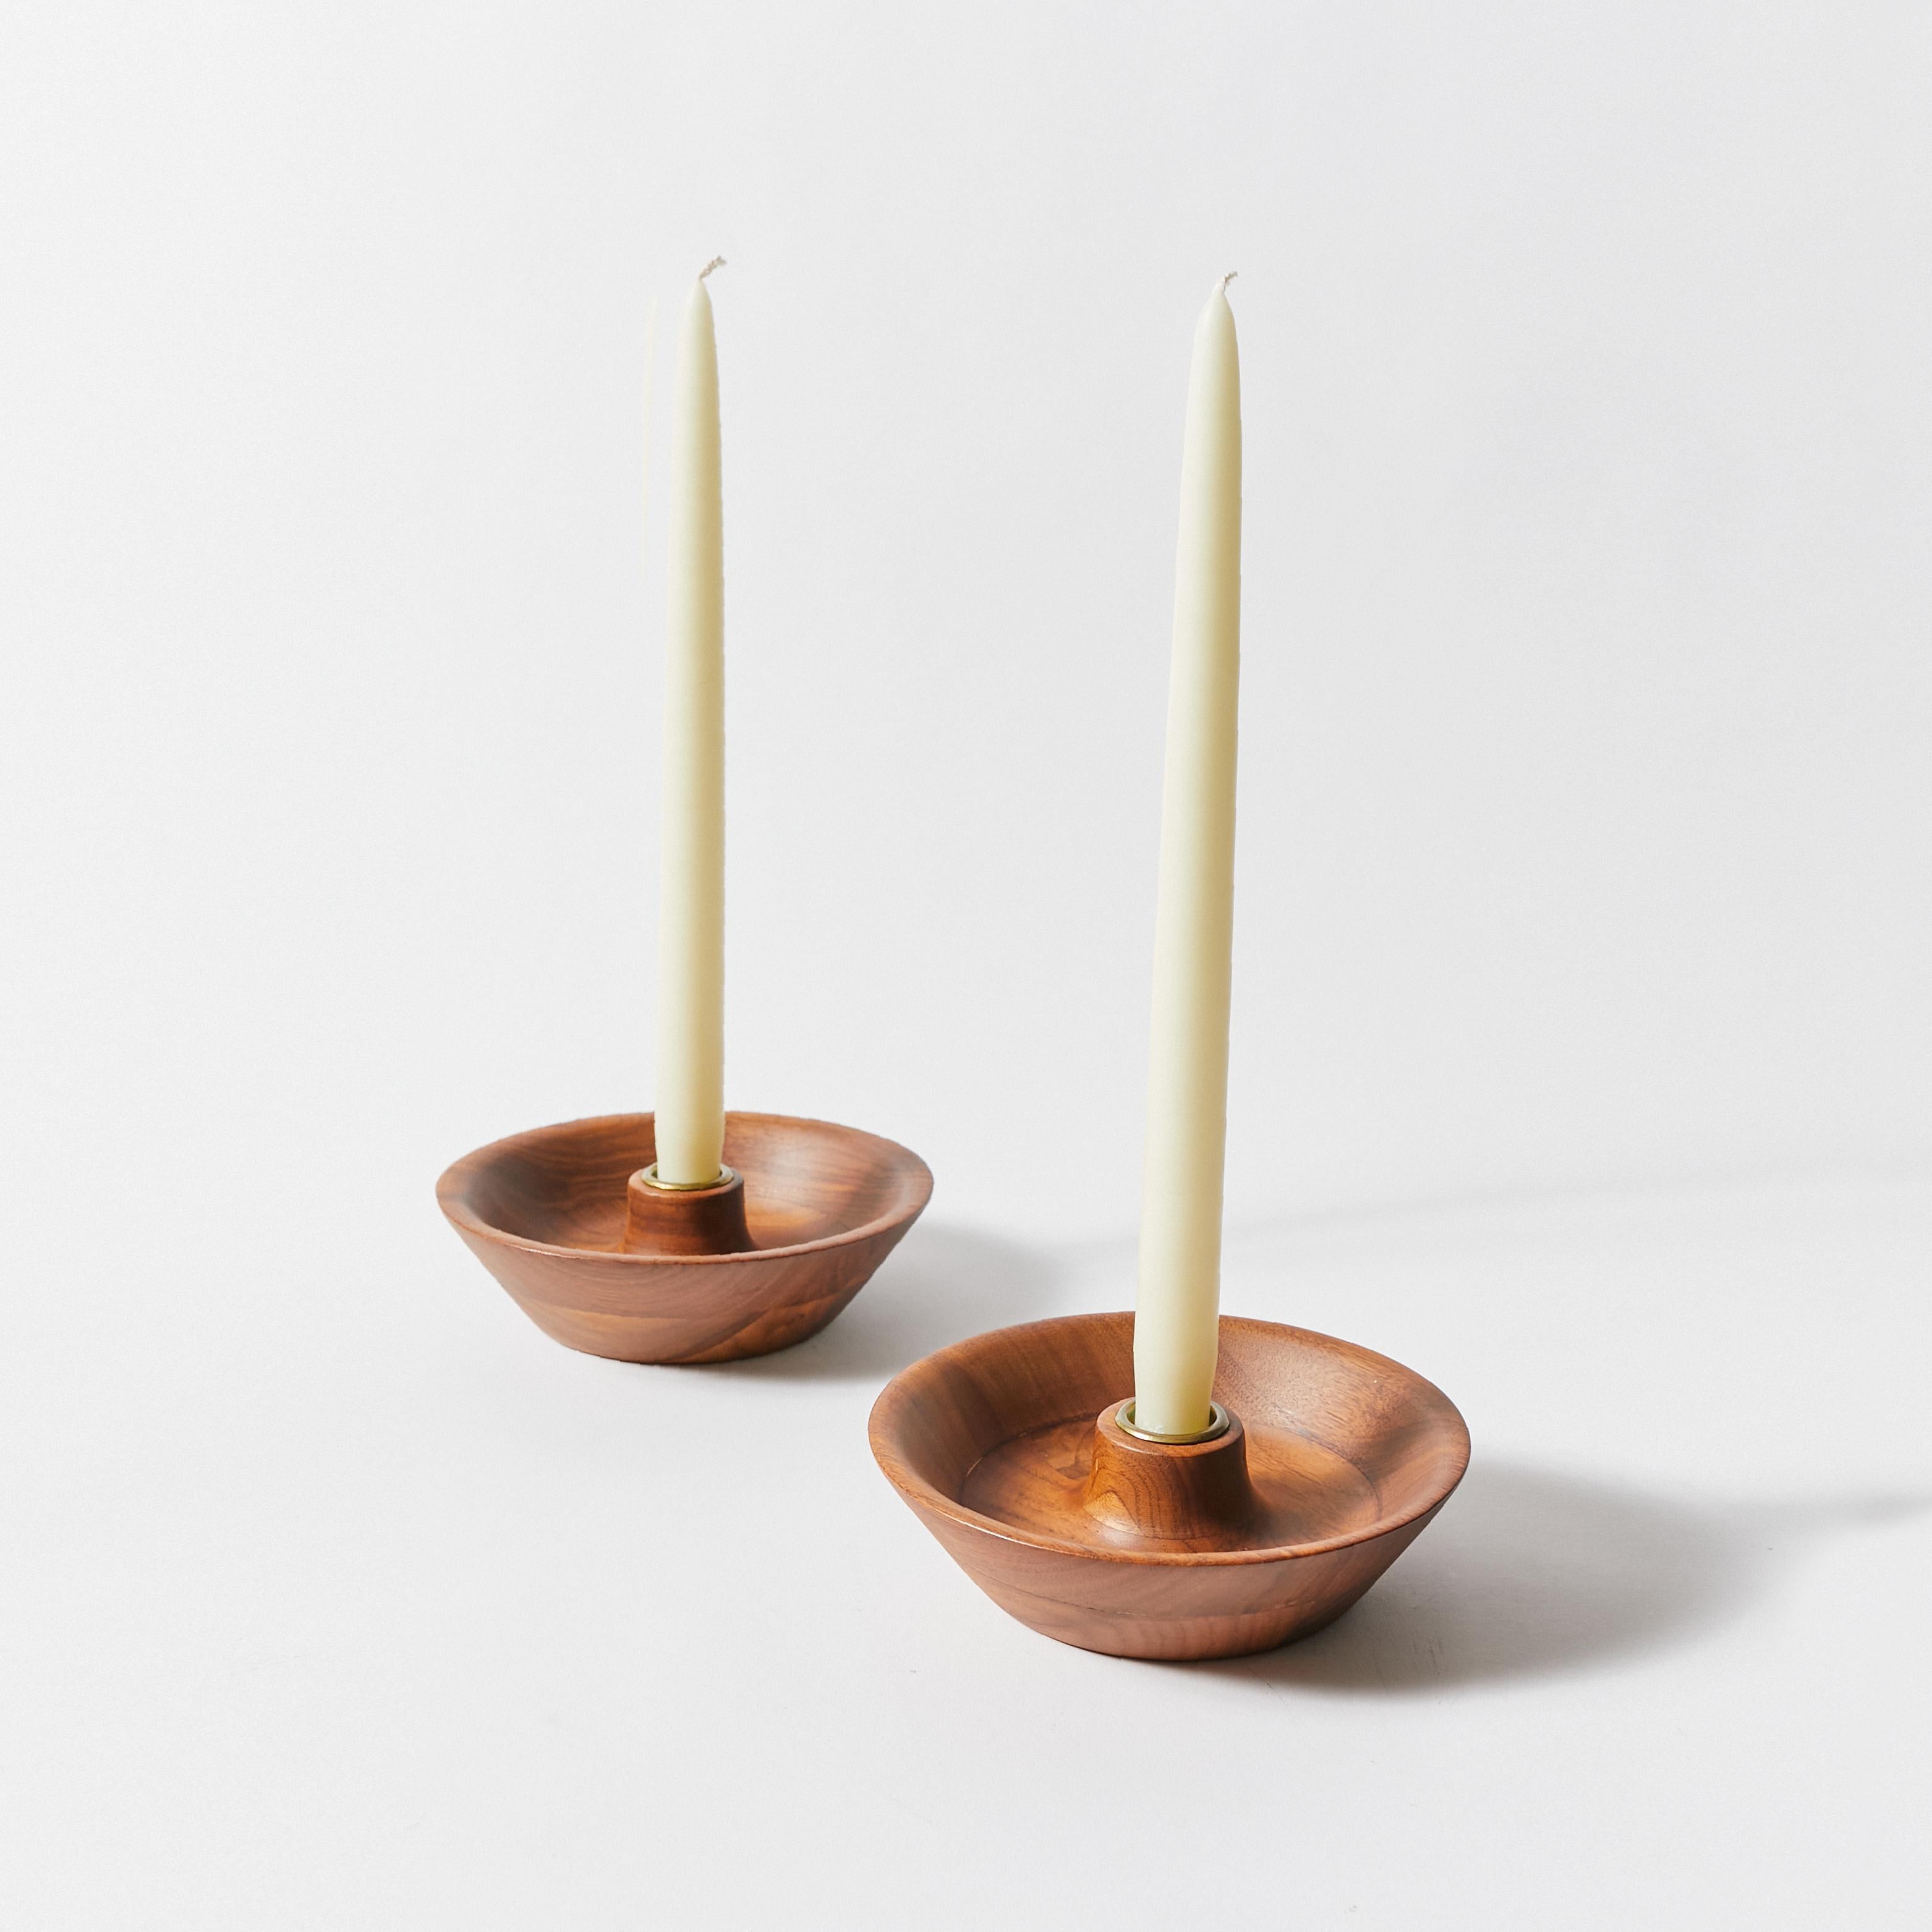 Set of two wooden candle holders by Dansk. Saucer tray in wood and candle cap in bronze. Not stamped.